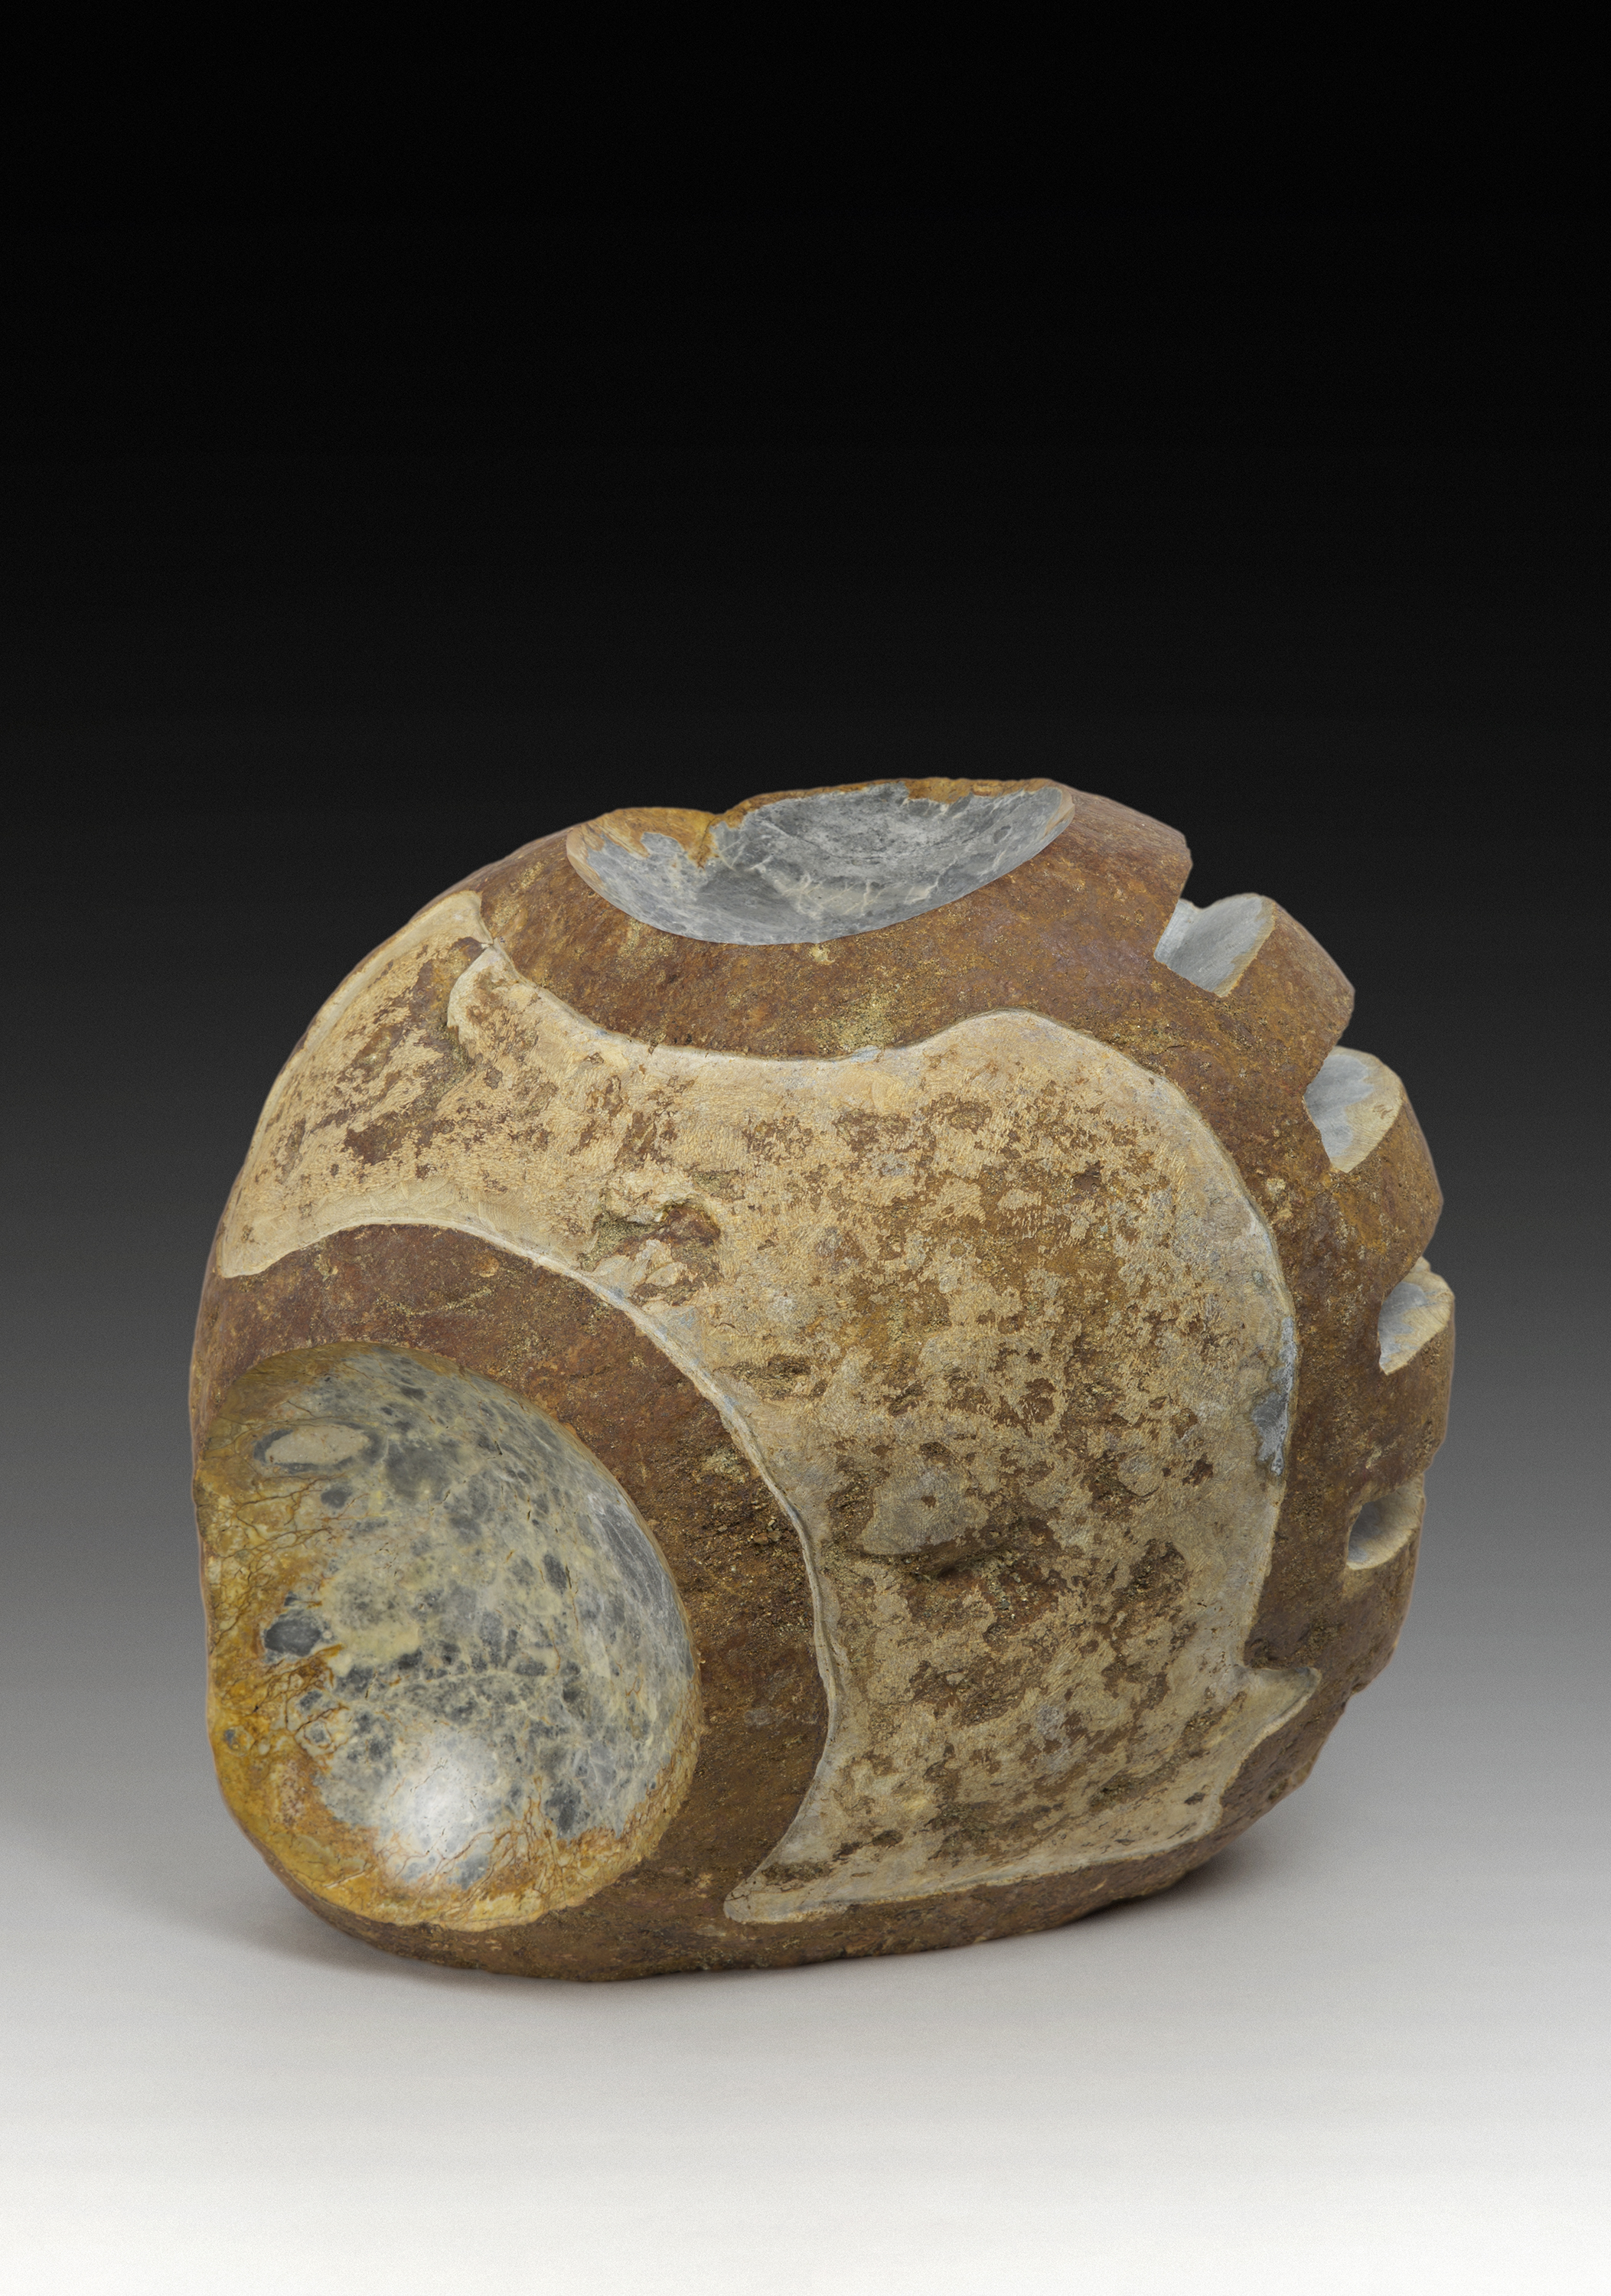 “What He Said”, igneous river rock, 14” tall, 2014 Deceptively hard stone. Looked almost crumbly before I touched it, but turns out to be crisp and hard. Mechanic and organic.